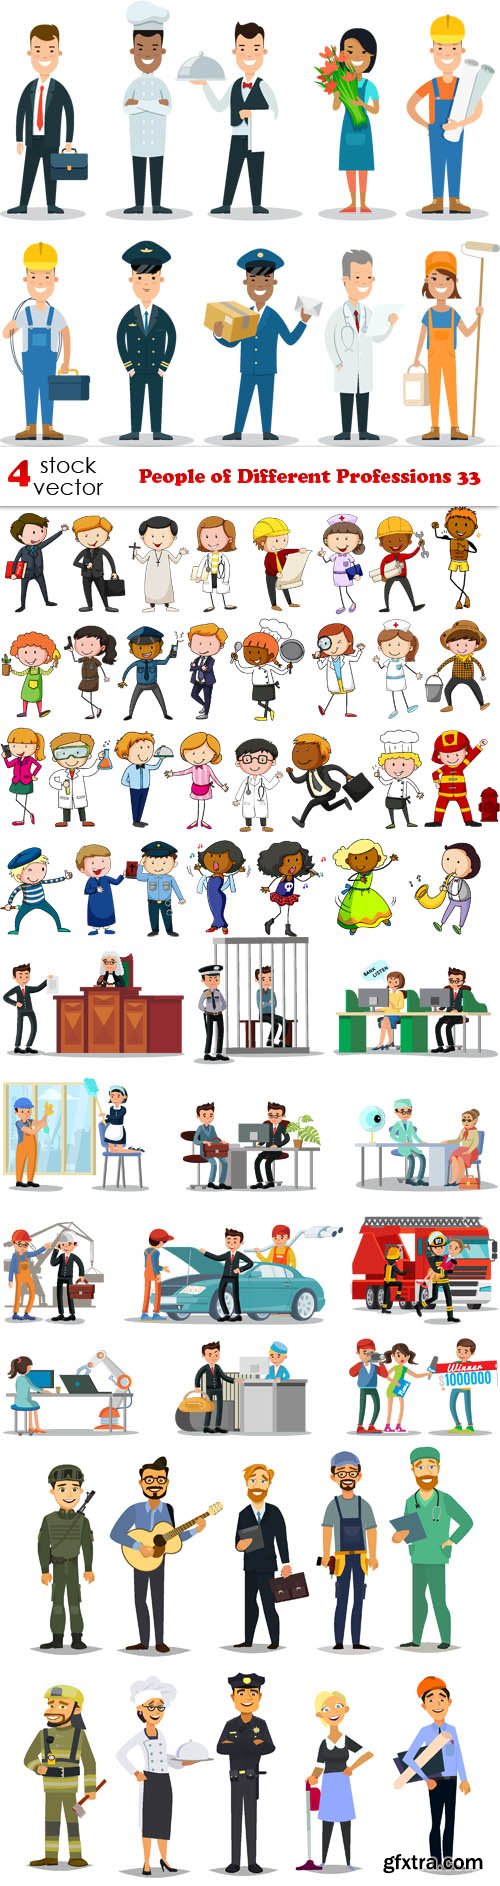 Vectors - People of Different Professions 33